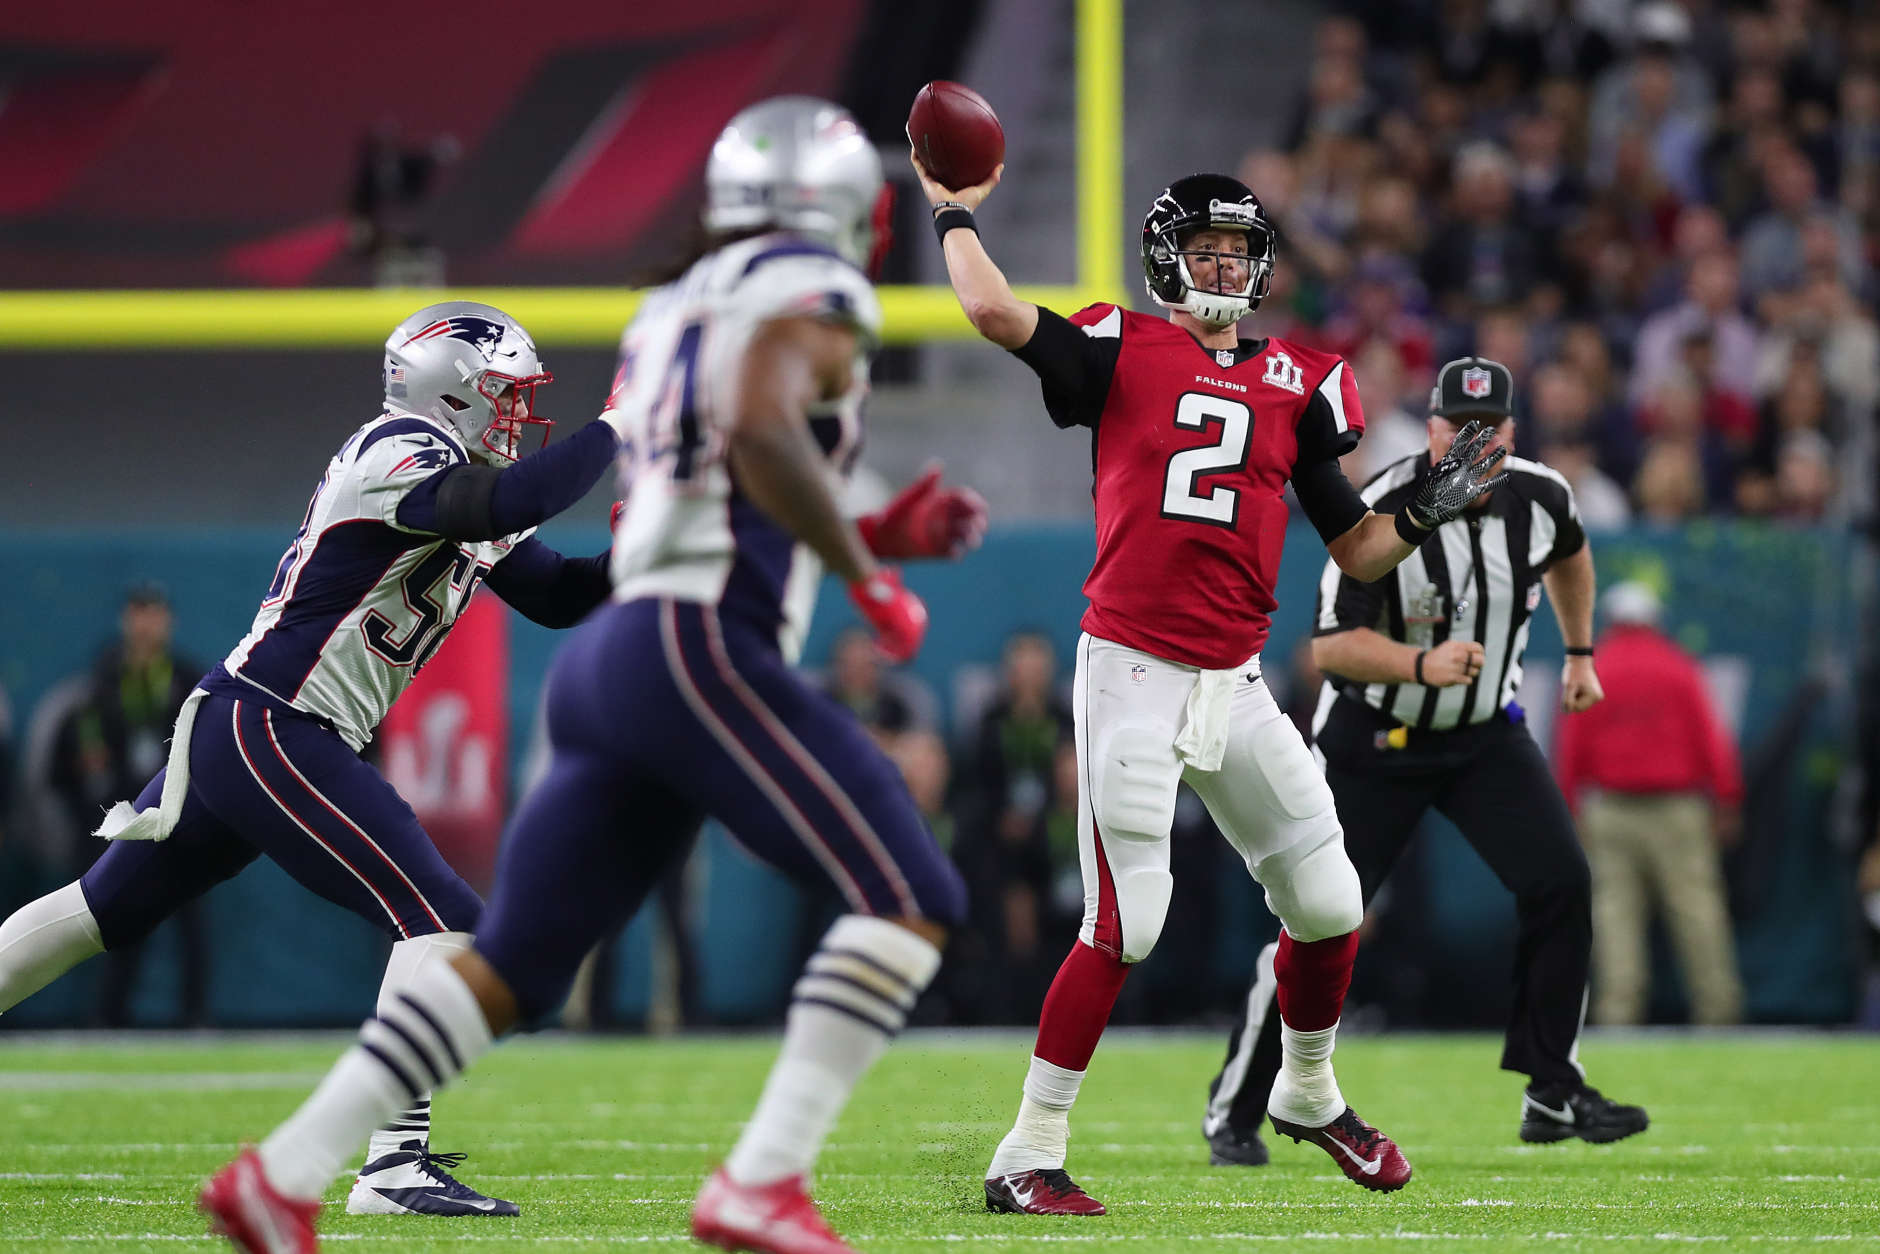 HOUSTON, TX - FEBRUARY 05:  Matt Ryan #2 of the Atlanta Falcons looks to pass against the New England Patriots during the second quarter during Super Bowl 51 at NRG Stadium on February 5, 2017 in Houston, Texas.  (Photo by Tom Pennington/Getty Images)